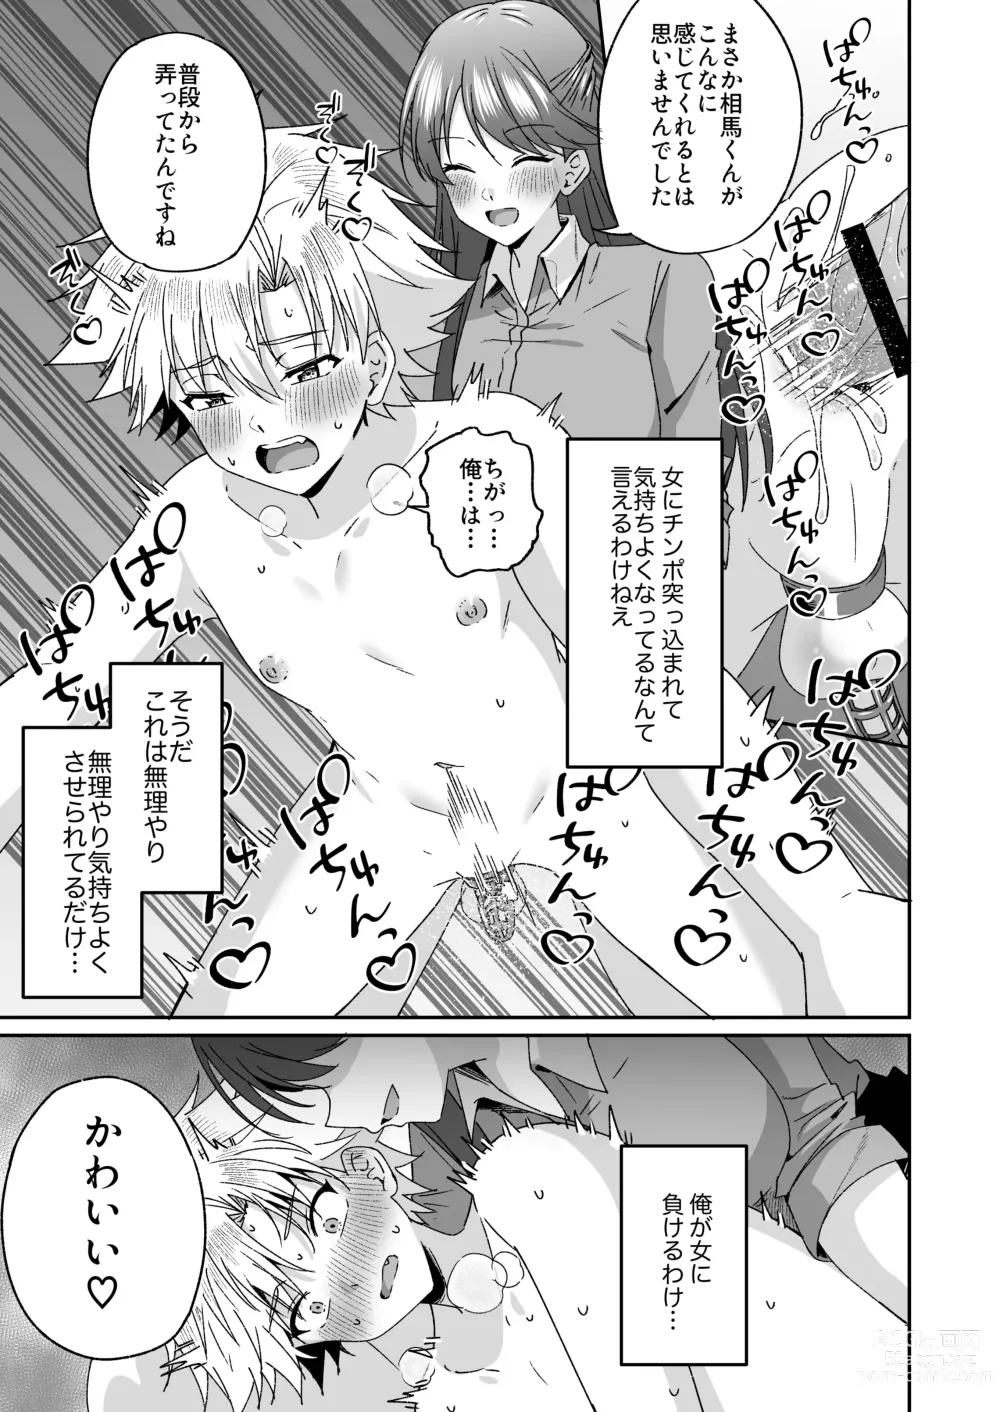 Page 34 of doujinshi A story about a delinquent boy who gets chastity belt ejaculation control reverse anal sex by a female teacher who is a nymphomaniac